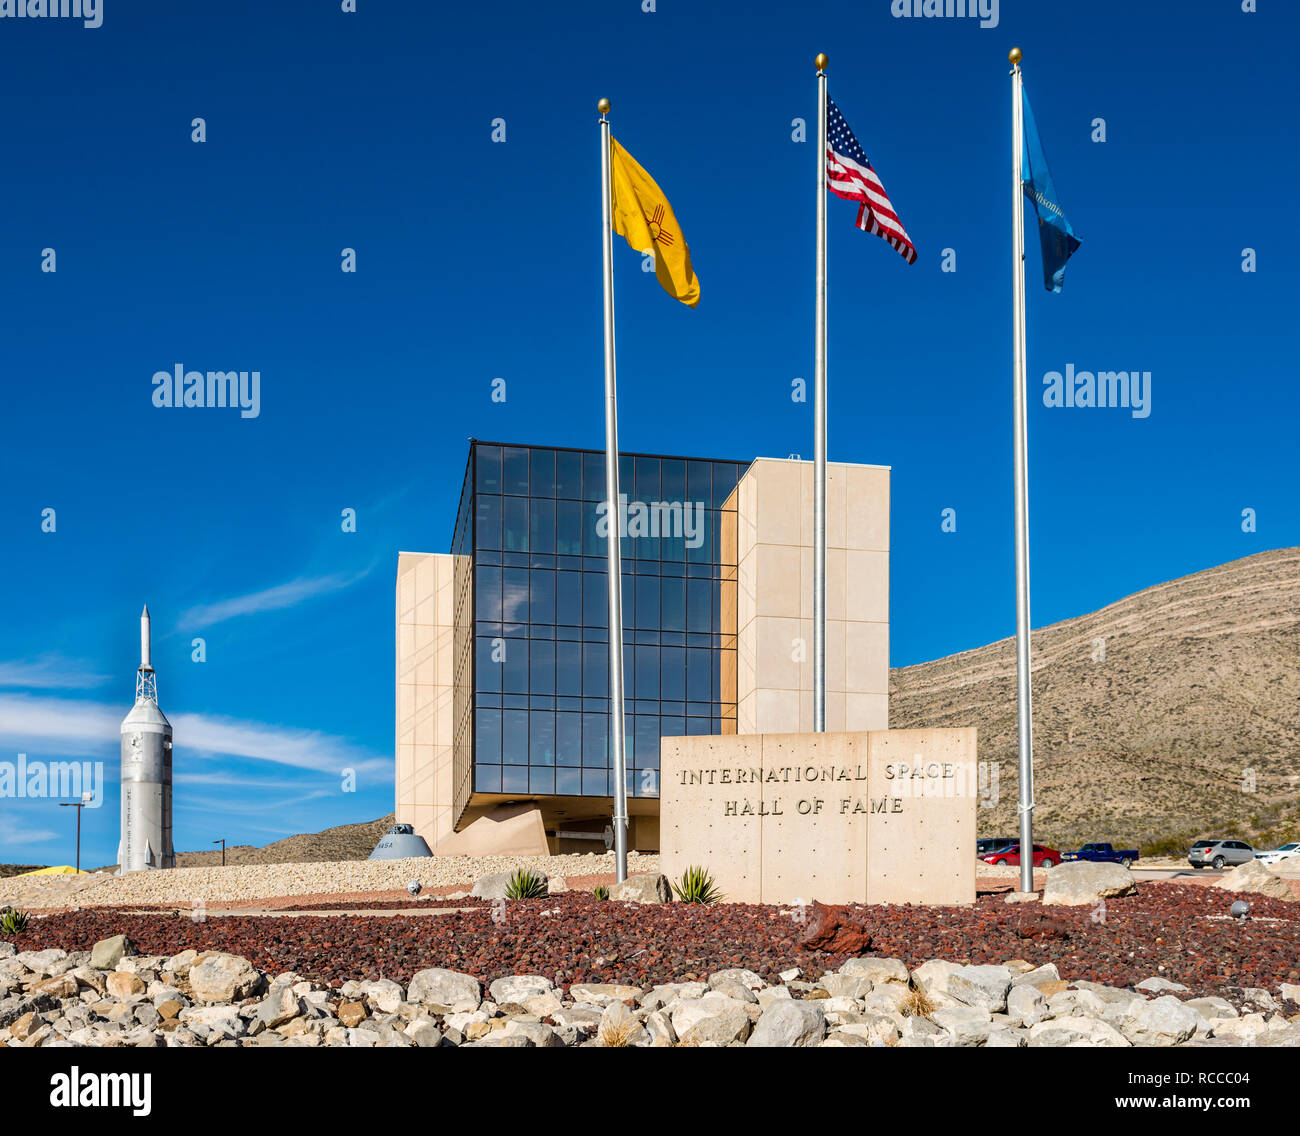 Alamogordo, New Mexico, USA, International Space Hall of Fame and New Mexico Museum of Space History. Stock Photo